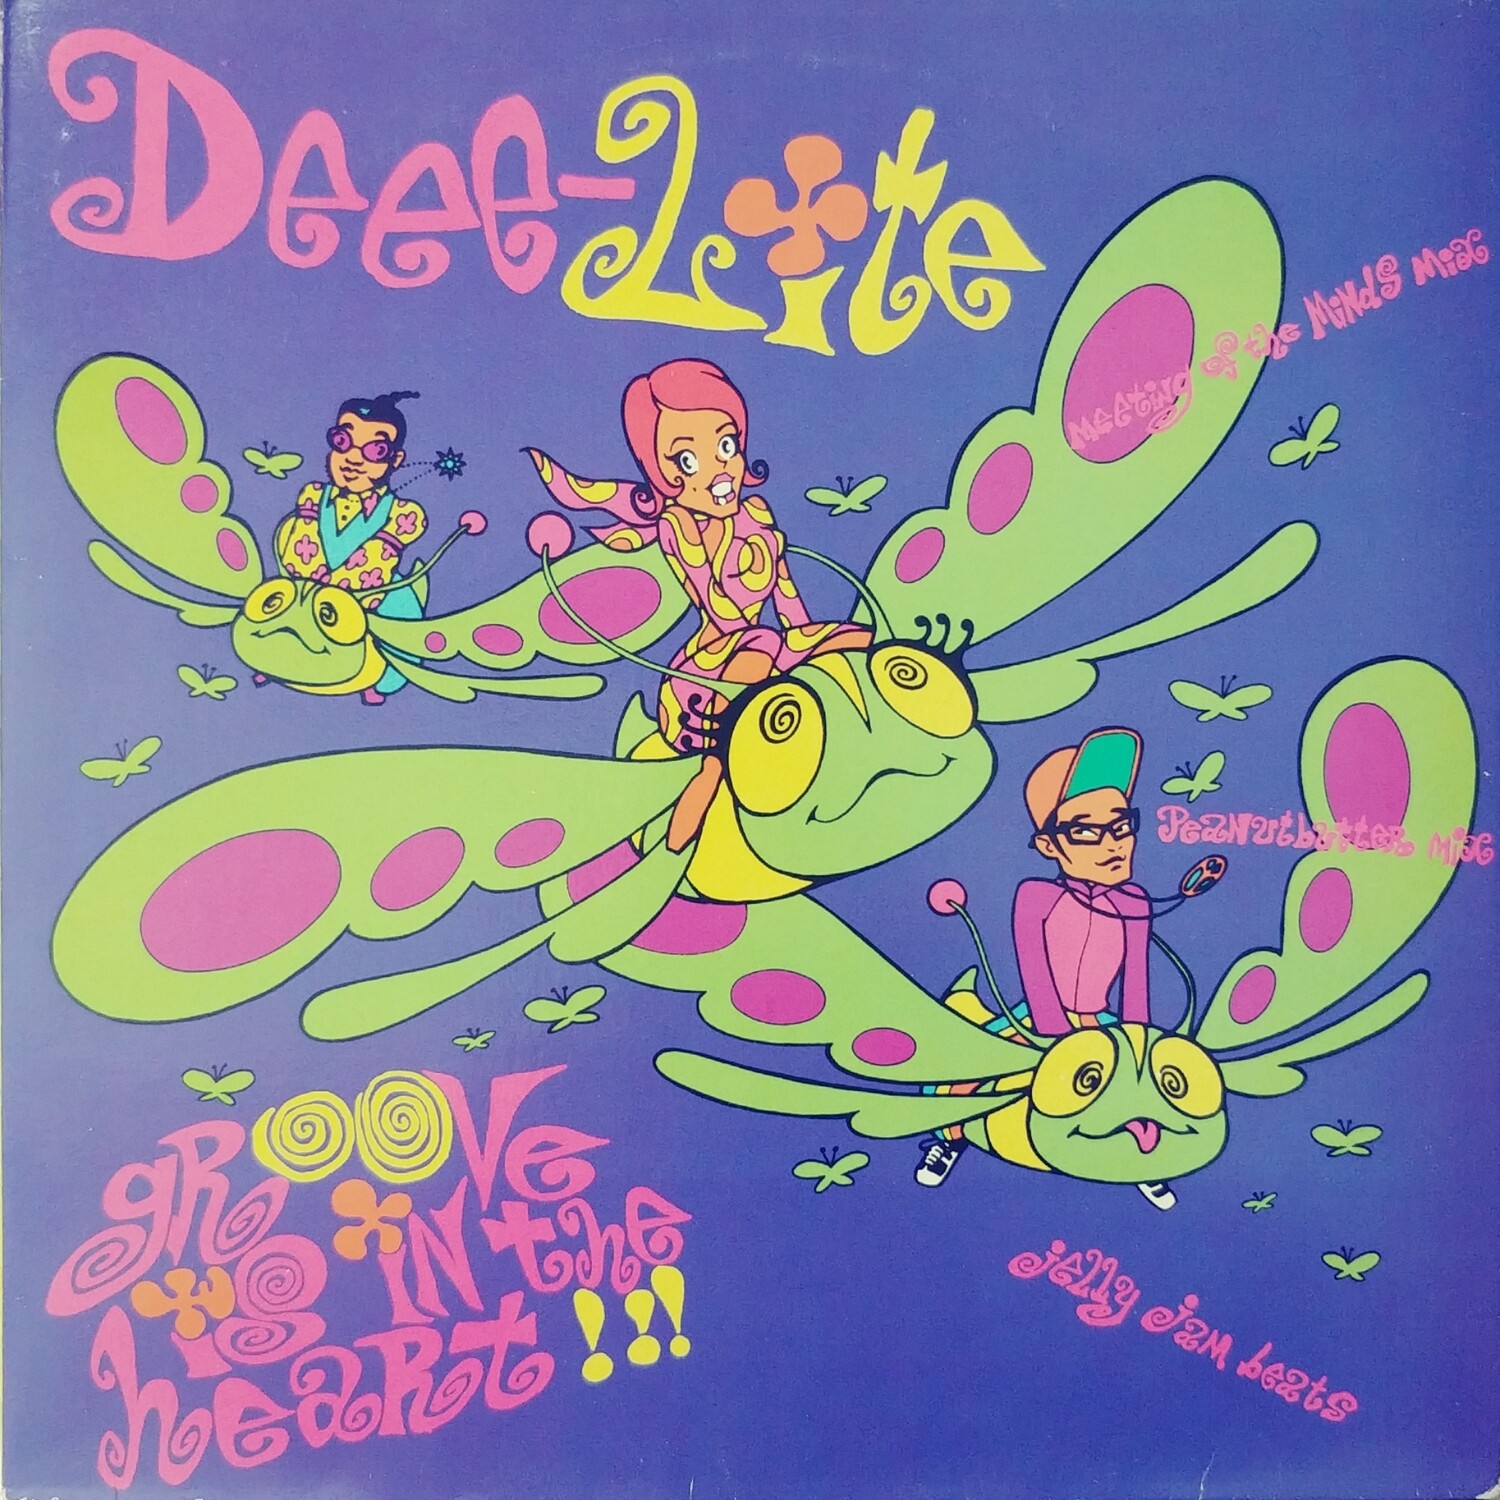 Deee-Lite - Groove is in the heart / What is love